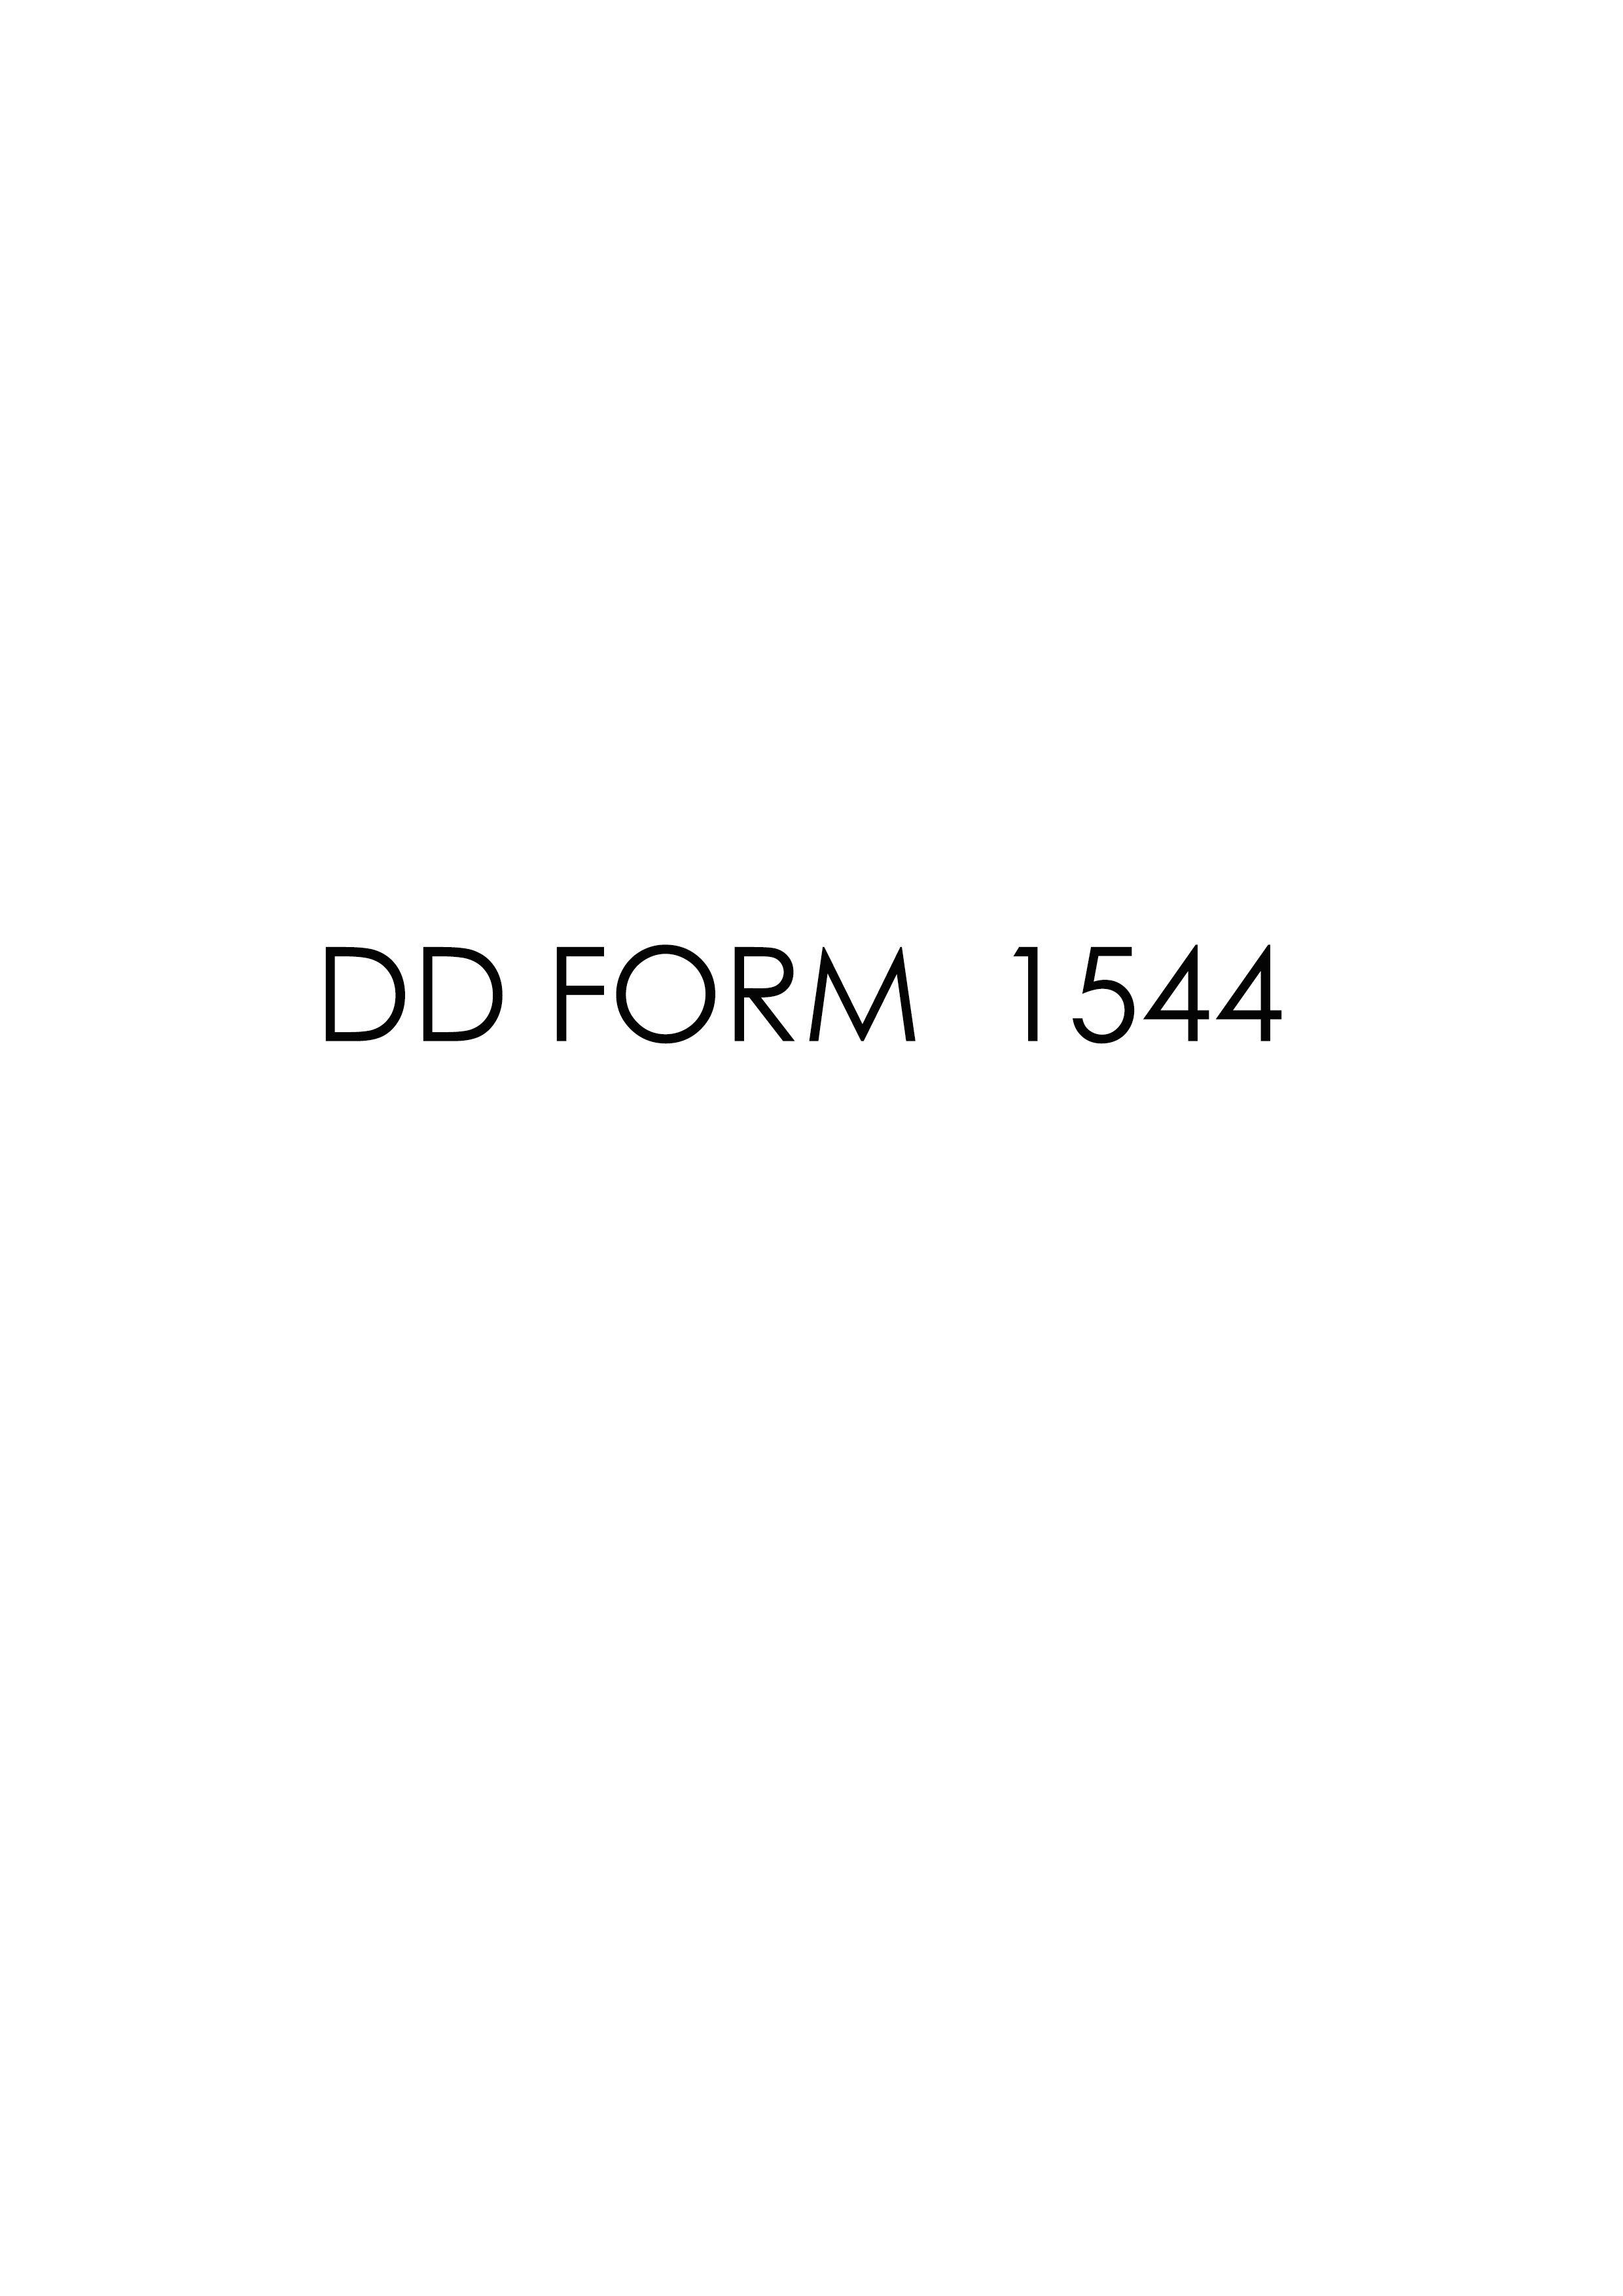 Download Fillable dd Form 1544